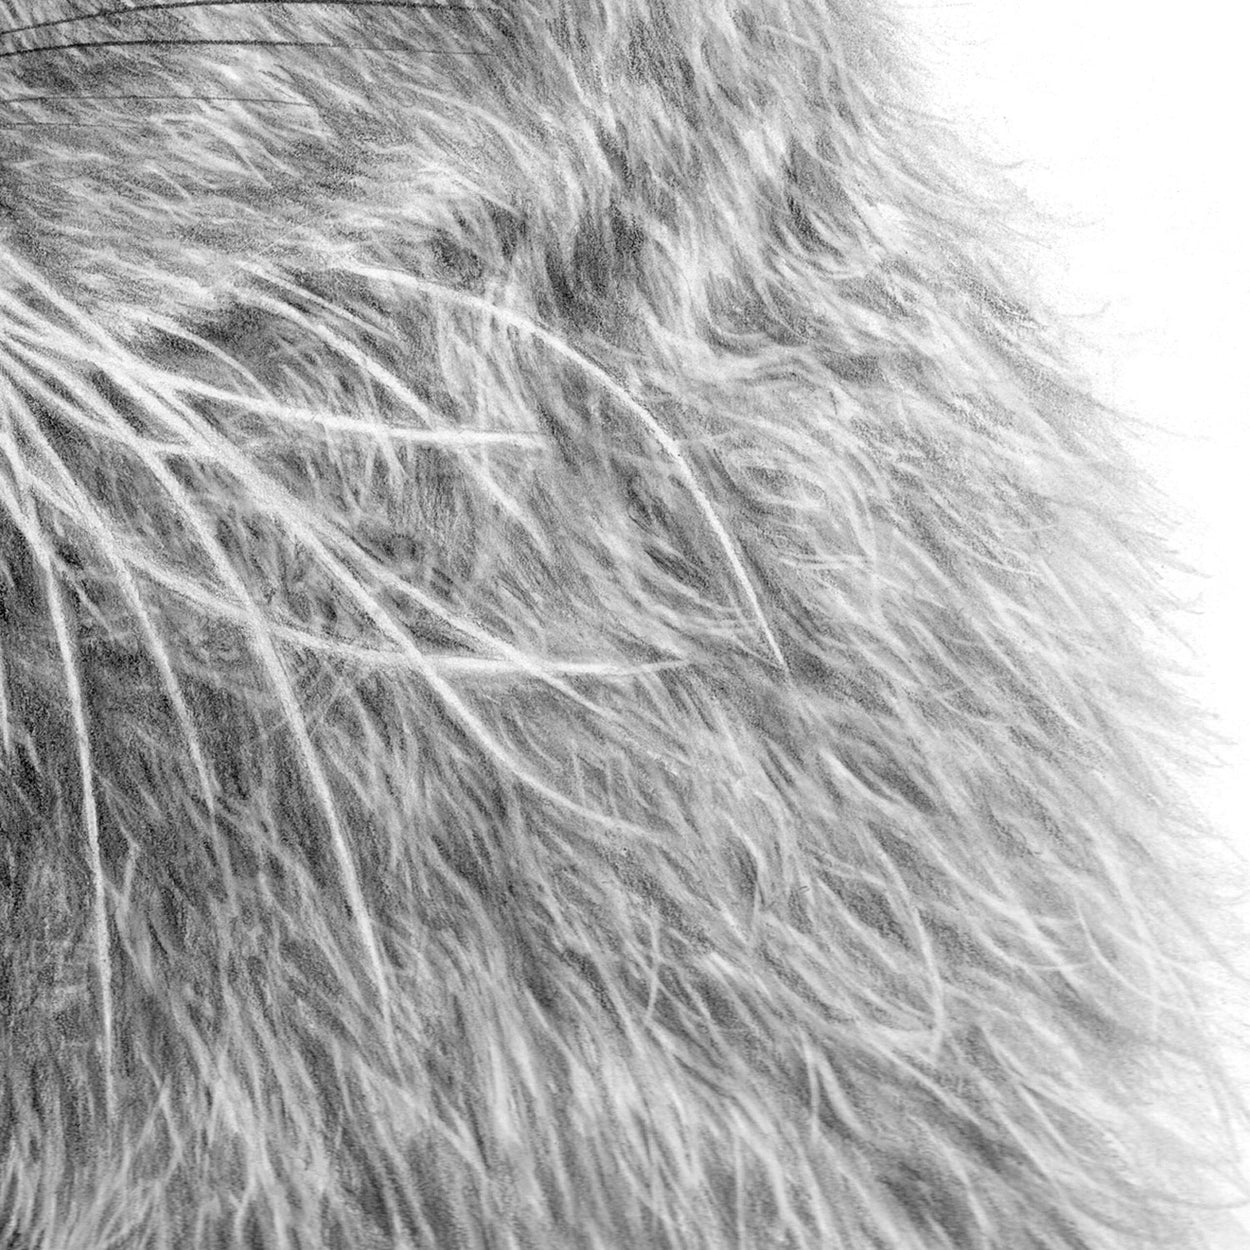 Hare Drawing -Close-up Fur - The Thriving Wild